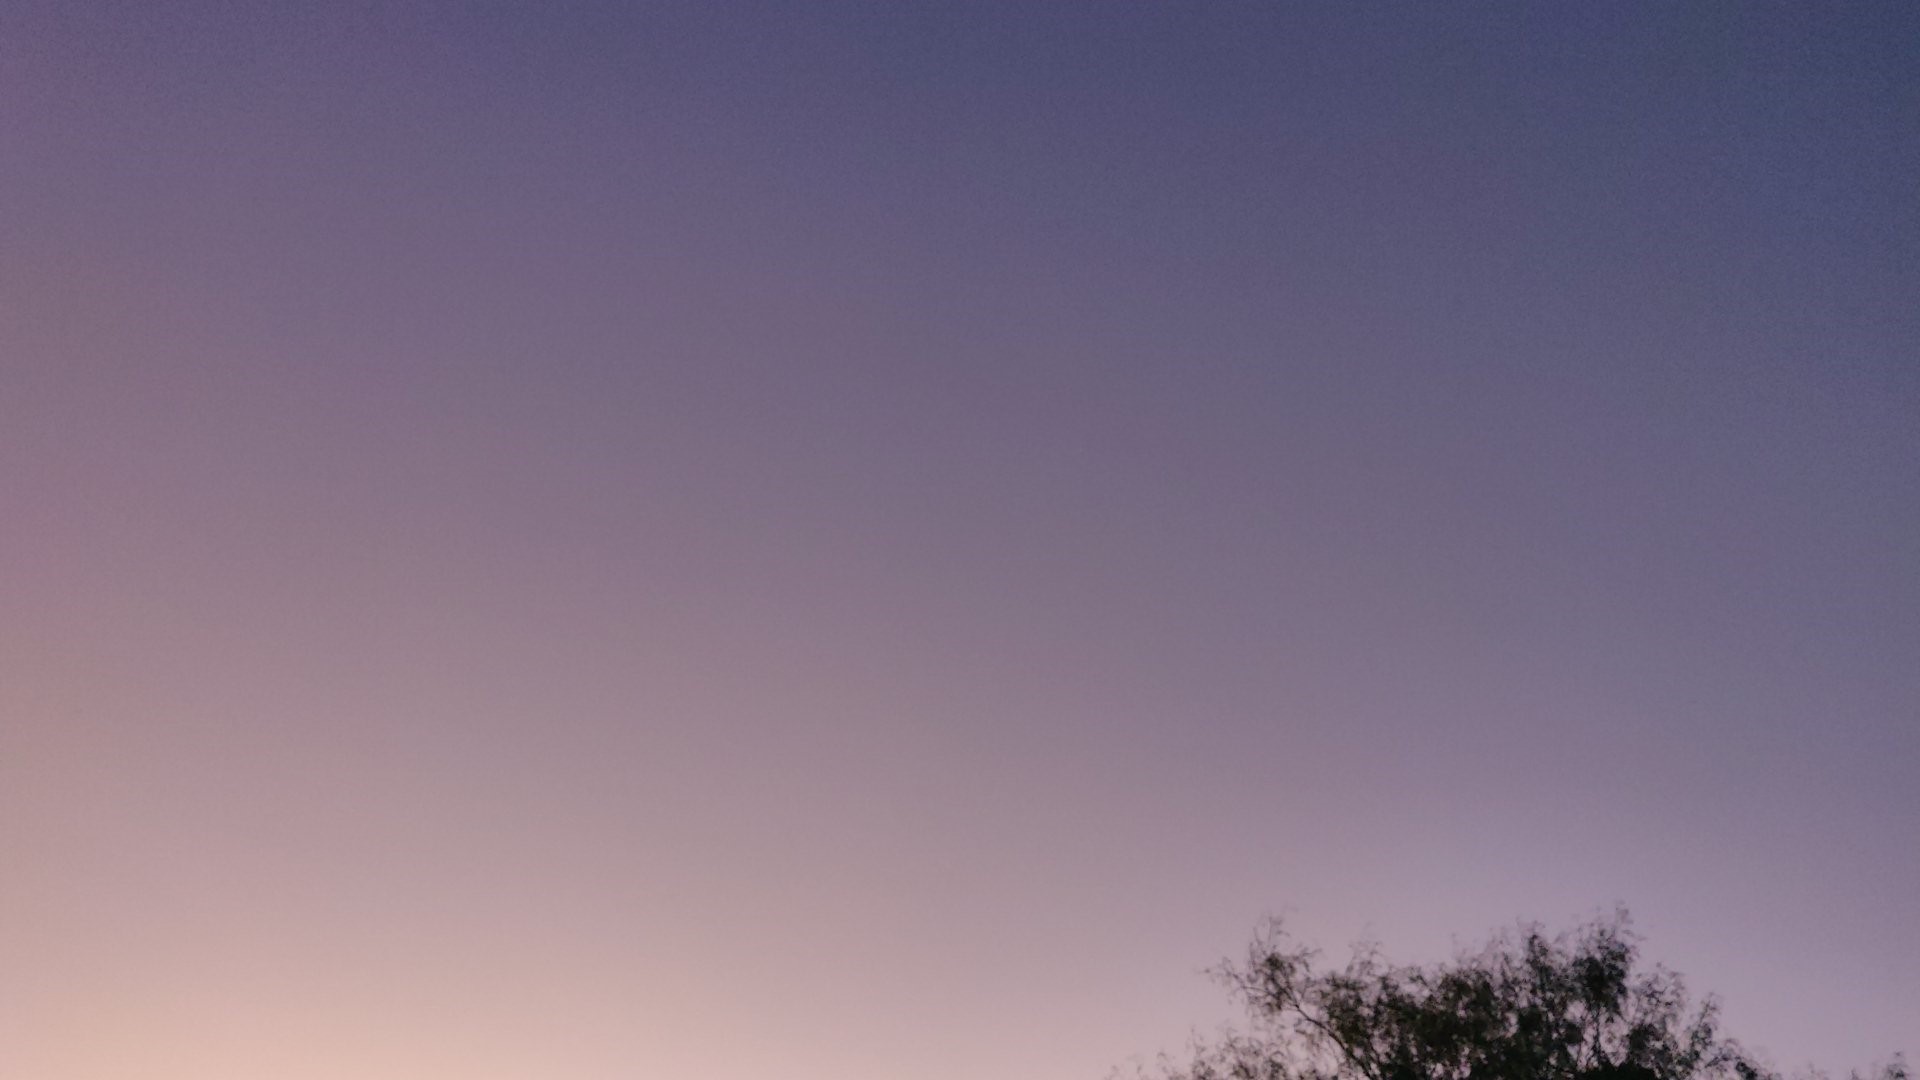 Purple skies observed in Dallas, Texas, USA on 27 October 2019